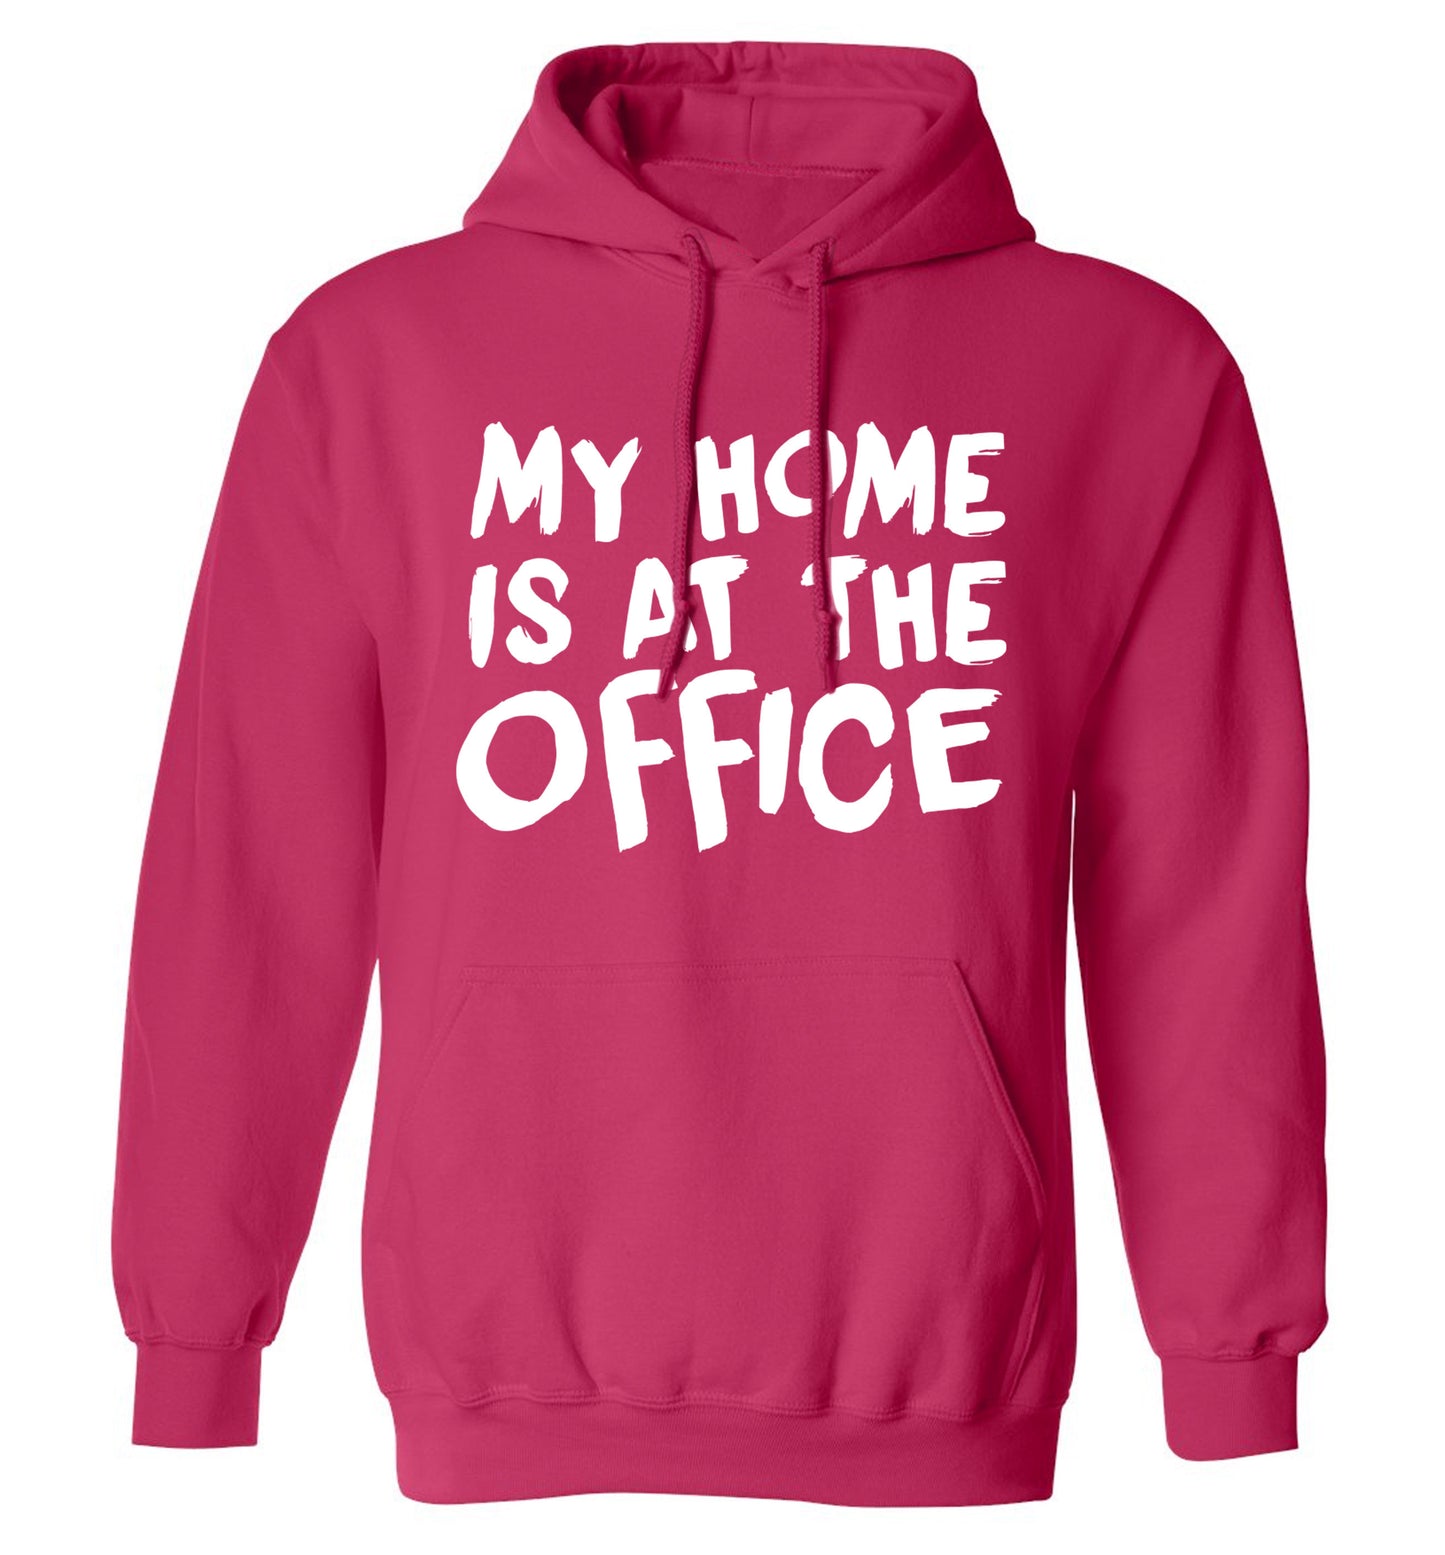 My home is at the office adults unisex pink hoodie 2XL